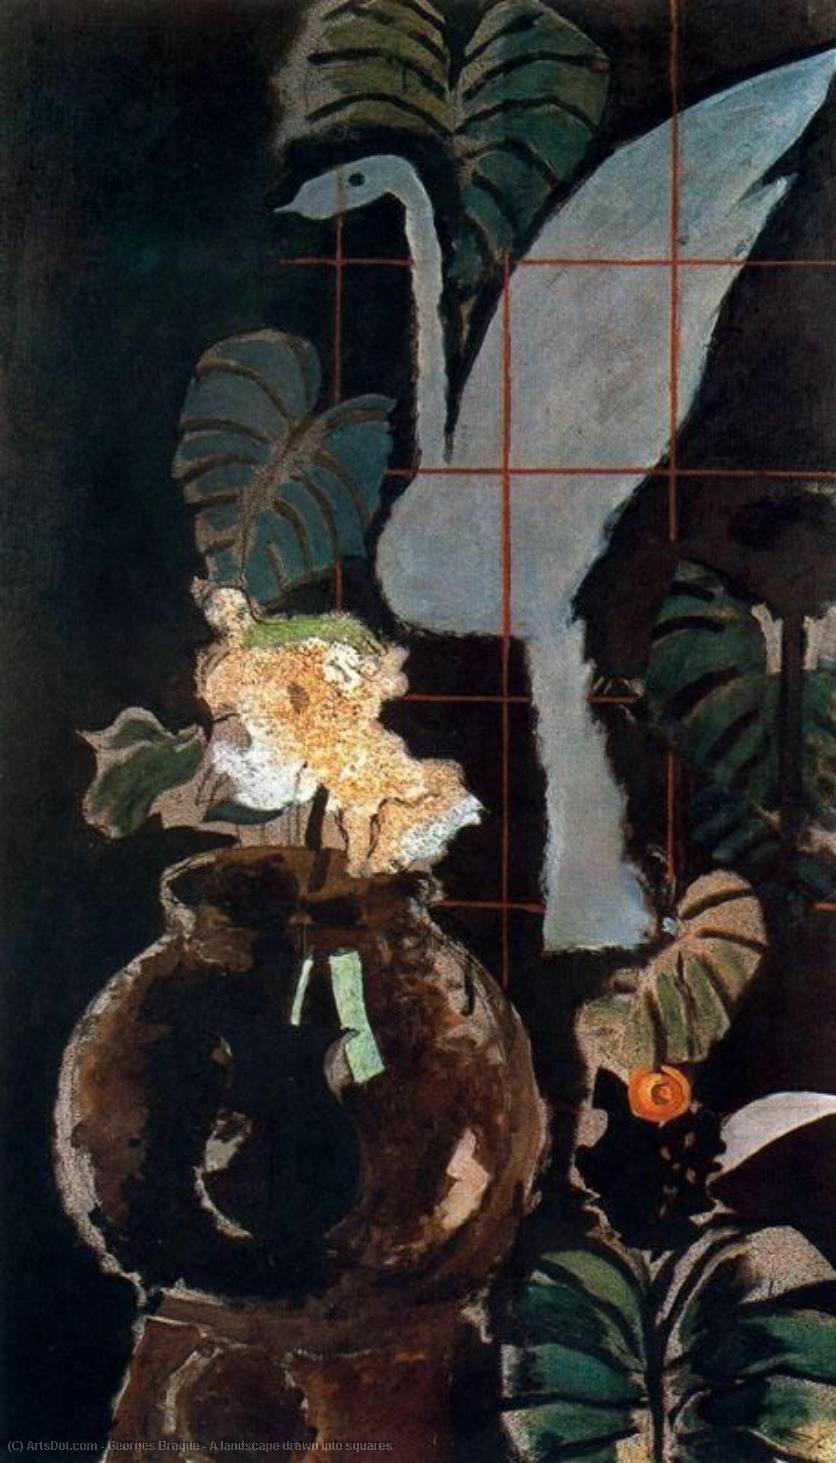 Wikioo.org - สารานุกรมวิจิตรศิลป์ - จิตรกรรม Georges Braque - A landscape drawn into squares